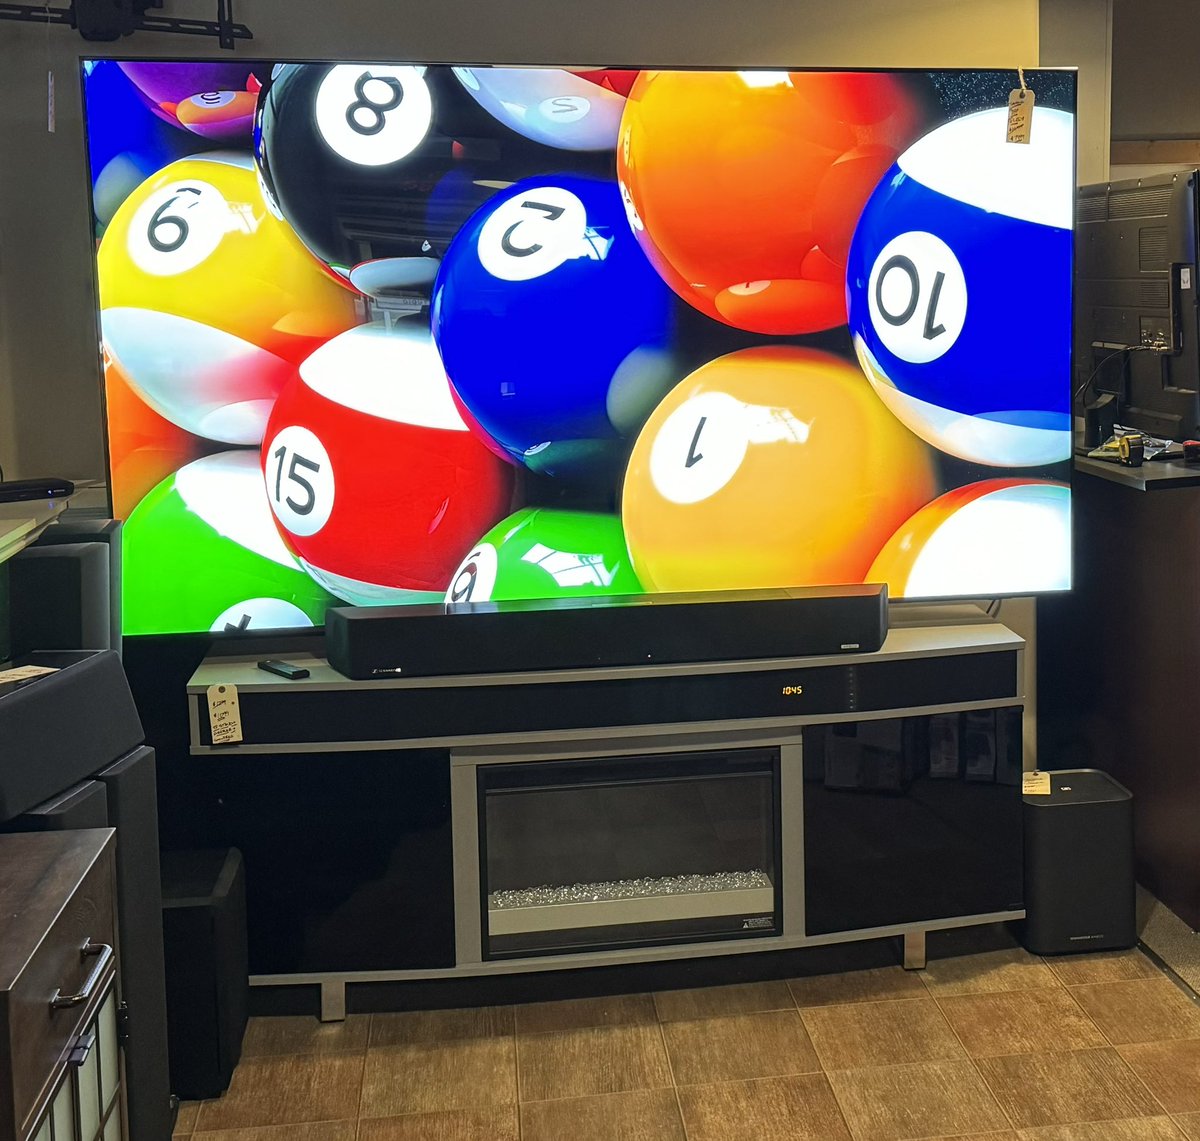 2 very different but equally mind blowing TV's now on demo!  🤯

Experience Samsung 98' QLED and LG 83' OLED proudly on display in our West Street showroom!

#samsung98q80c #samsungqledtv #samsung98inch #lgoled #lg83 #gobigorgohome #bigscreen